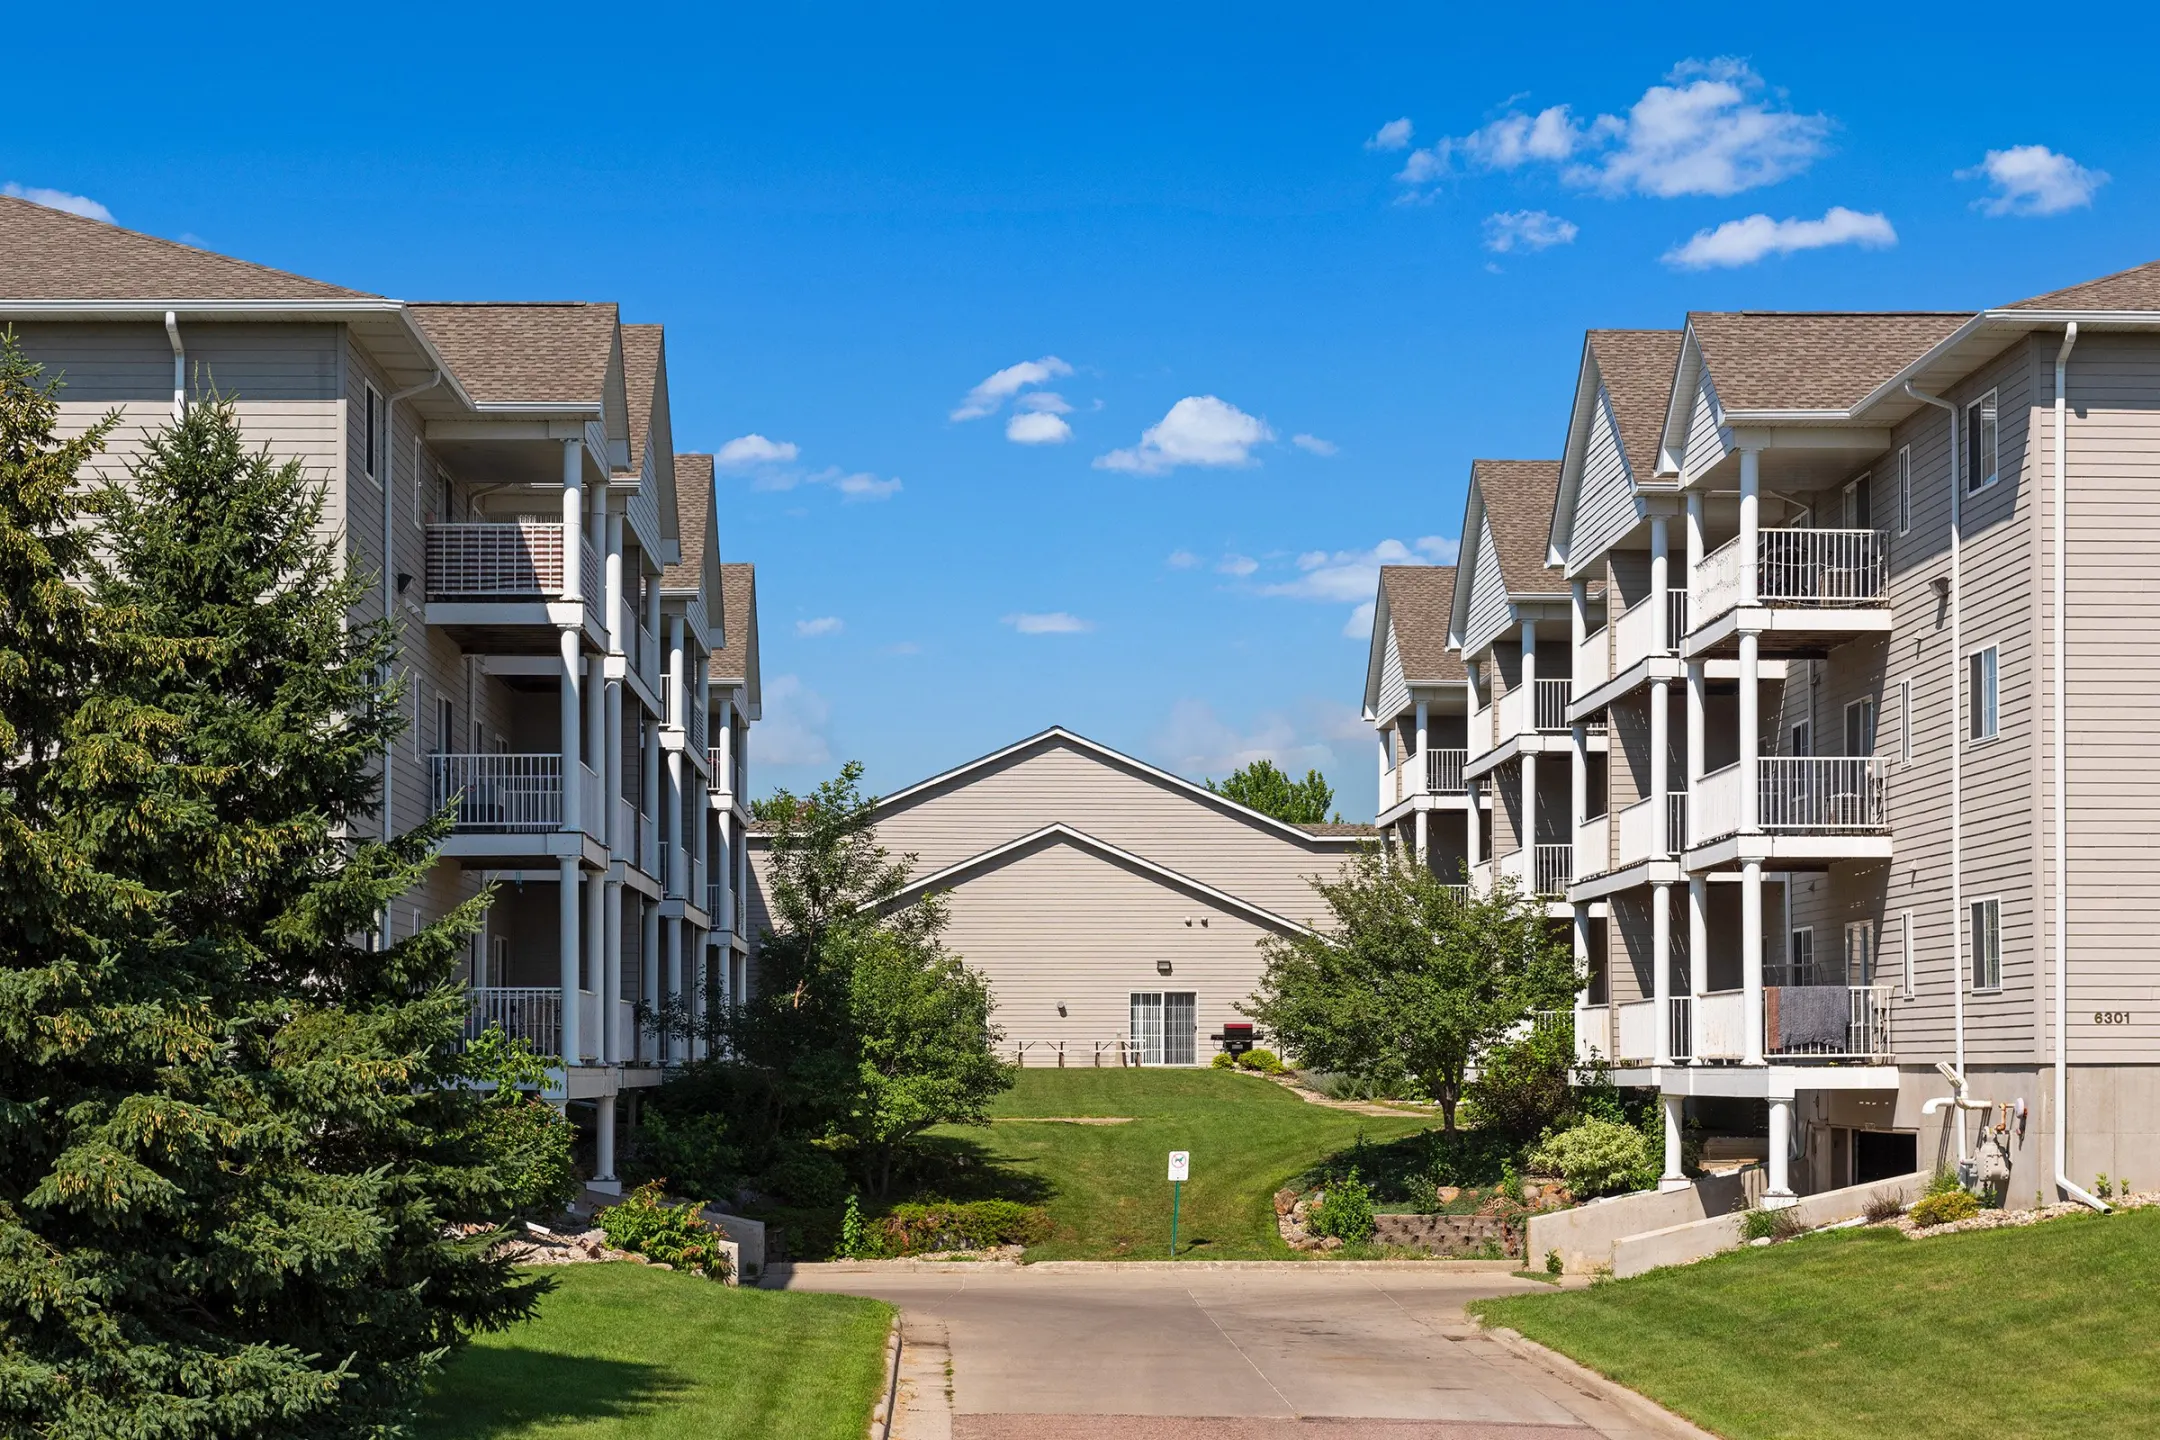 Building - Platinum Valley Apartments - Sioux Falls, SD